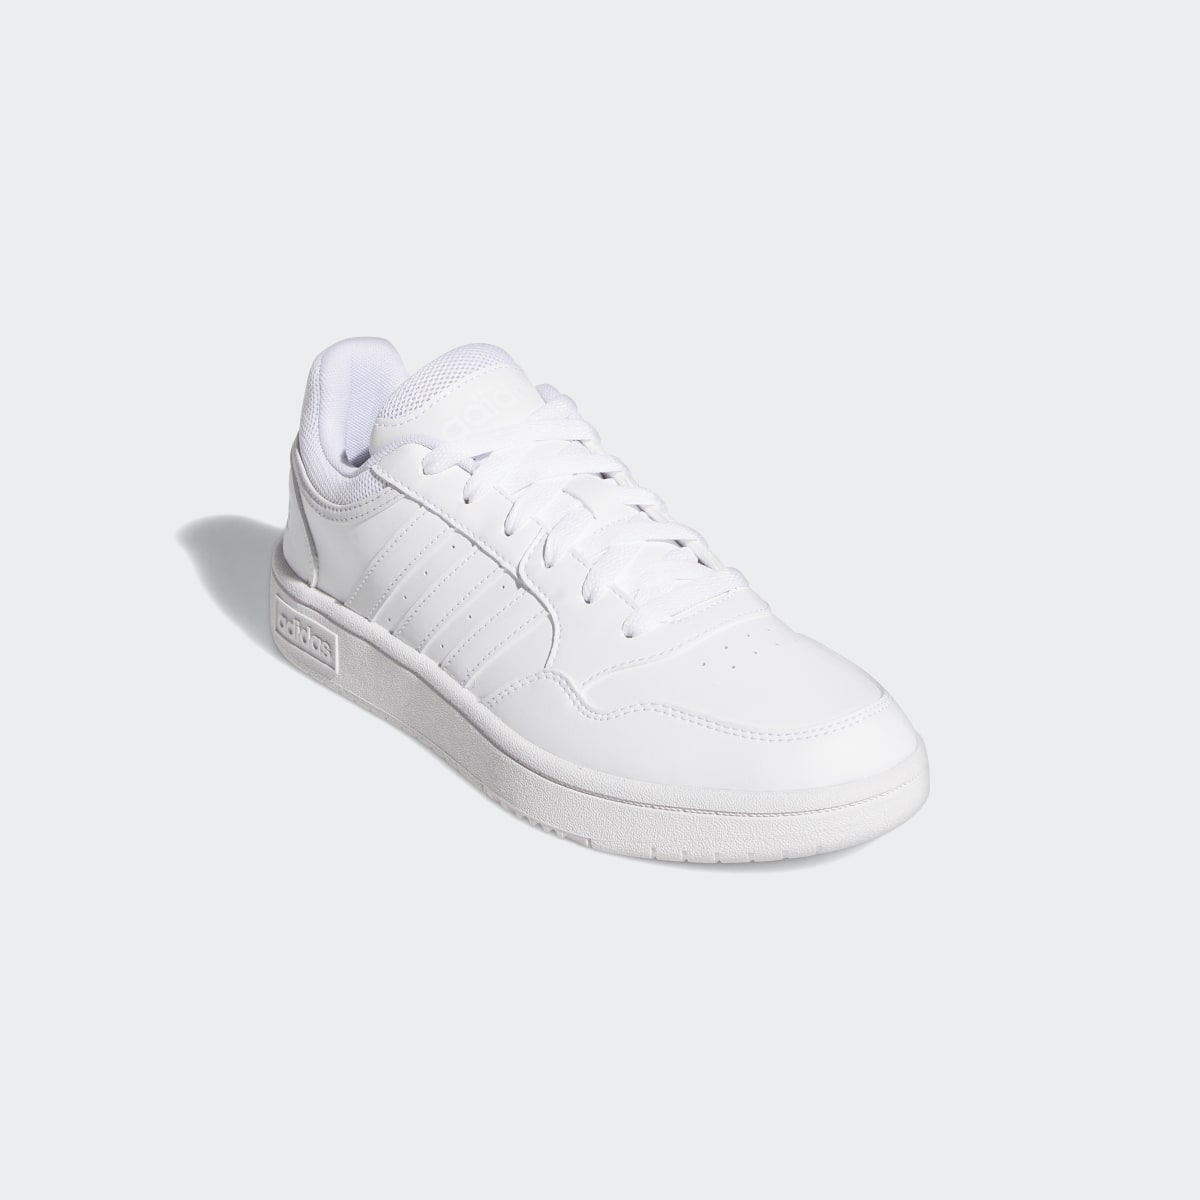 Adidas Hoops 3.0 Low Classic Schuh. 7